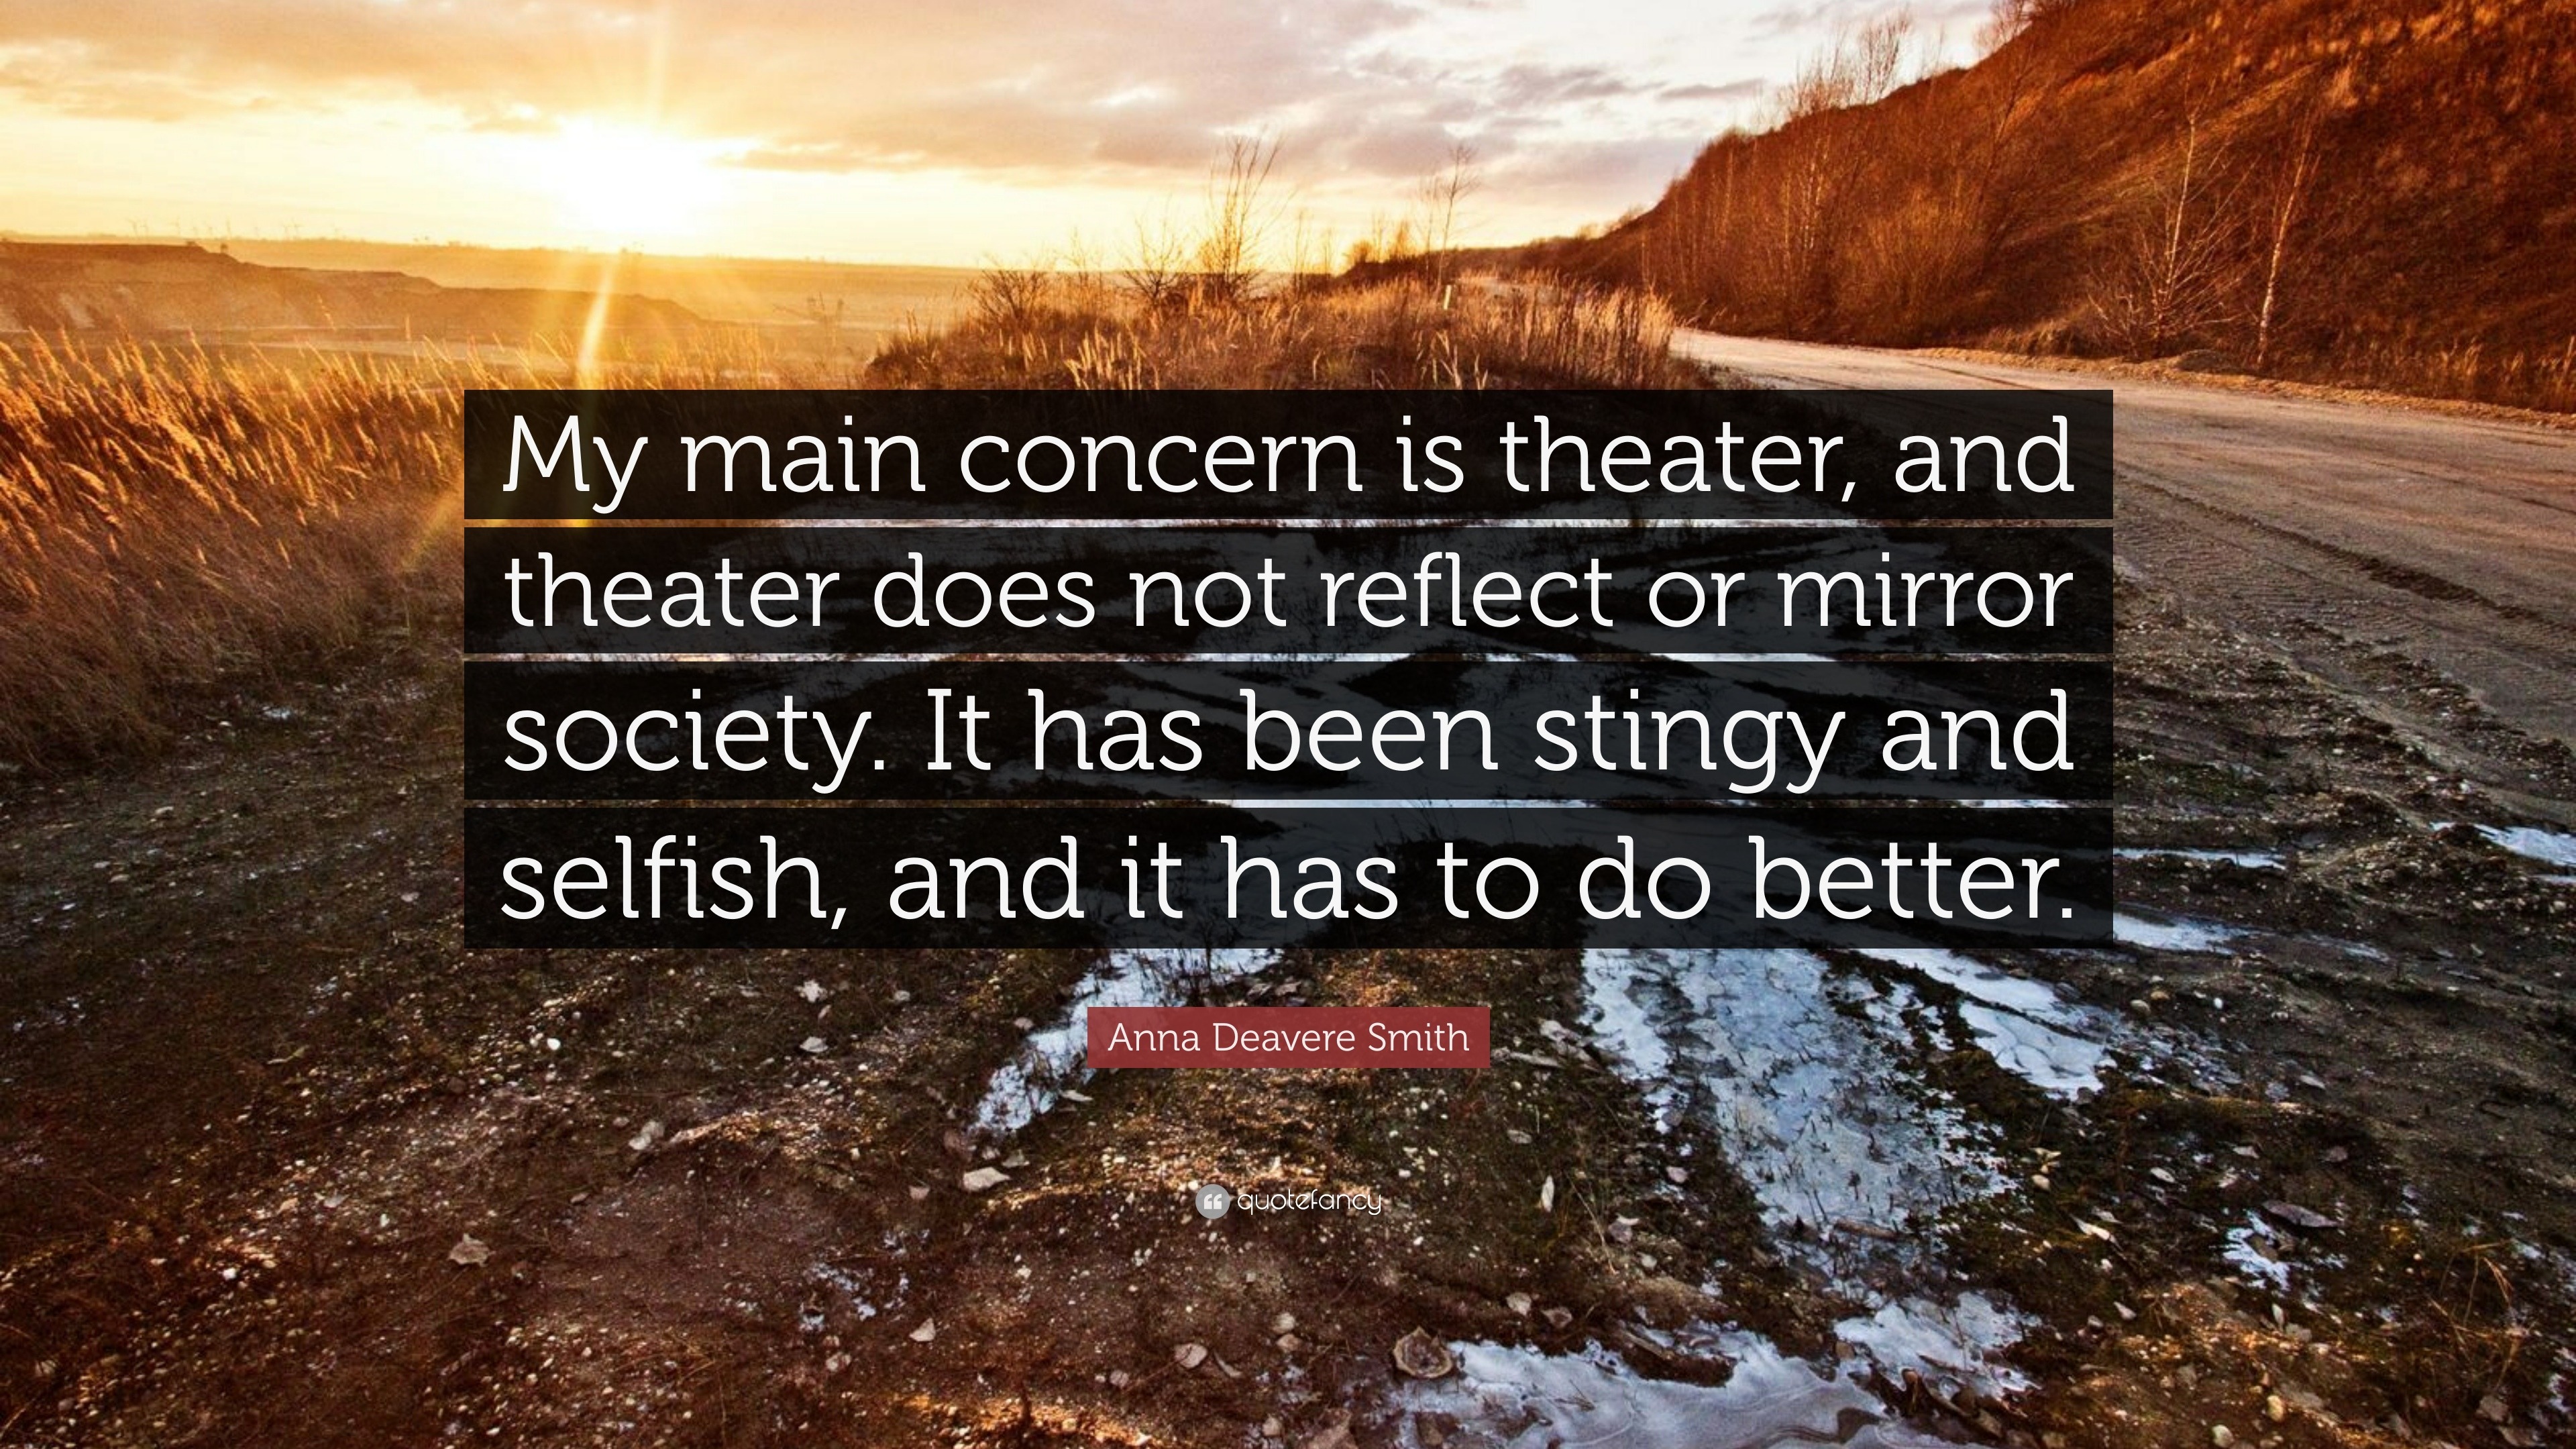 Anna Deavere Smith Quote: “My main concern is theater, and theater does ...